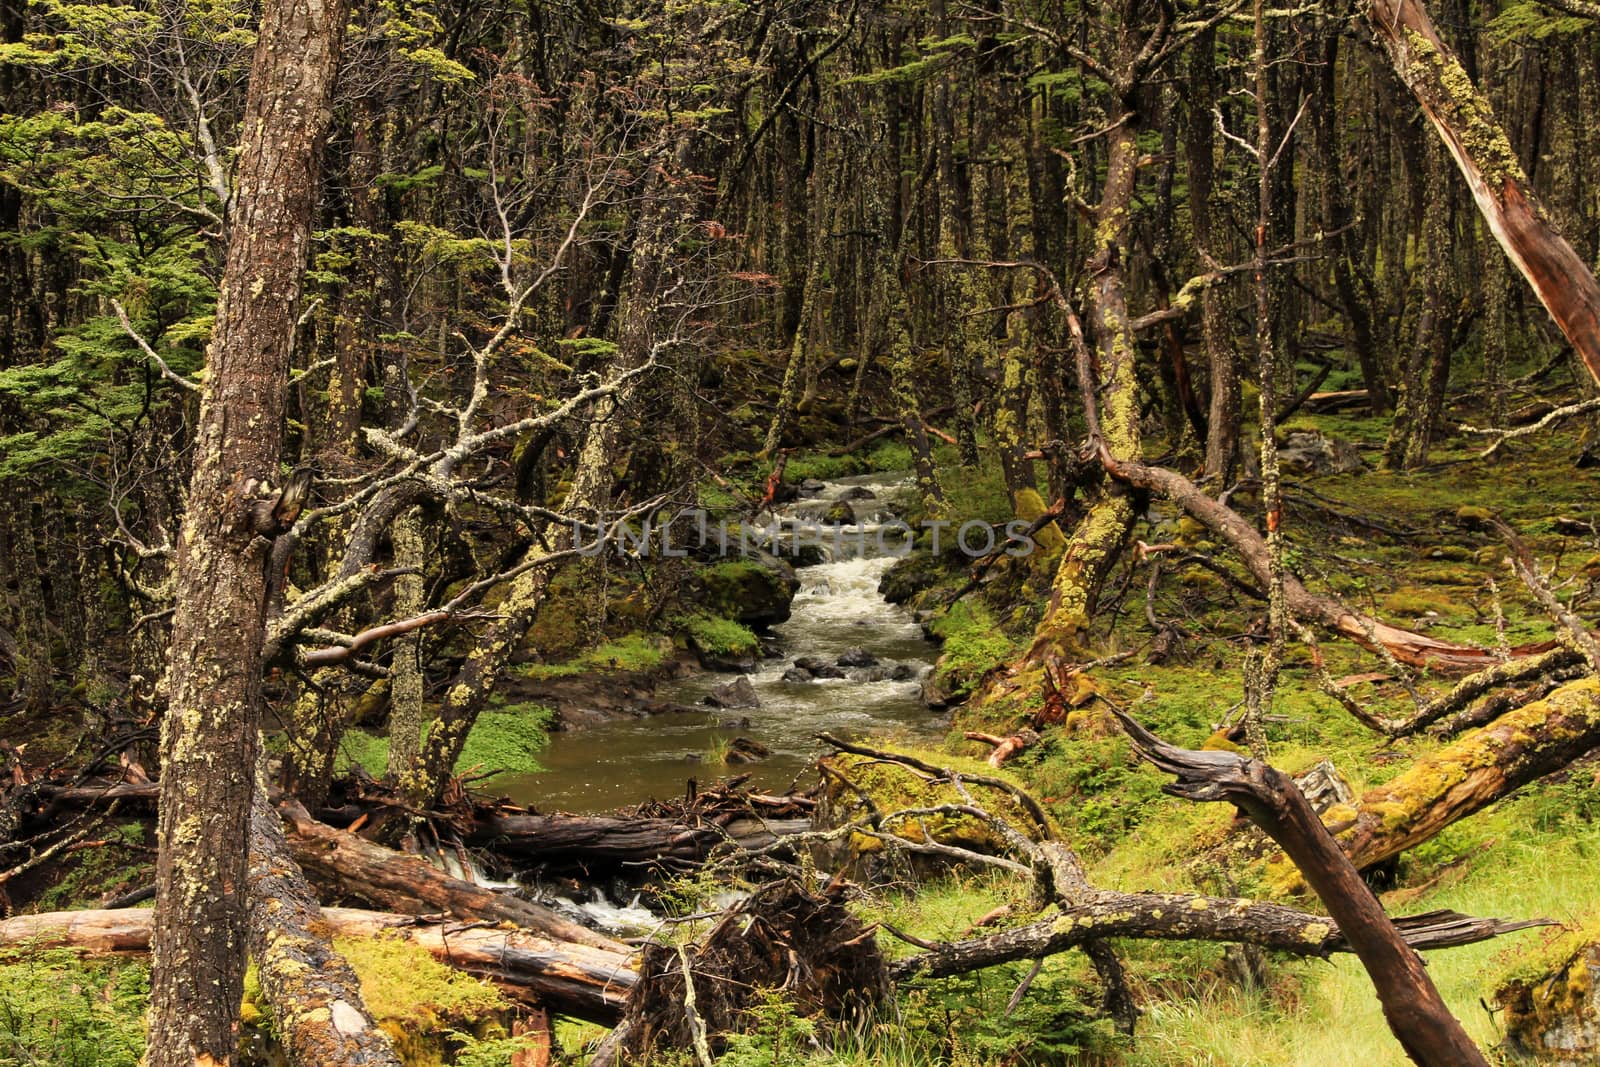 Wild river in an overgrown forest, Tierra Del Fuego, Chile by cicloco